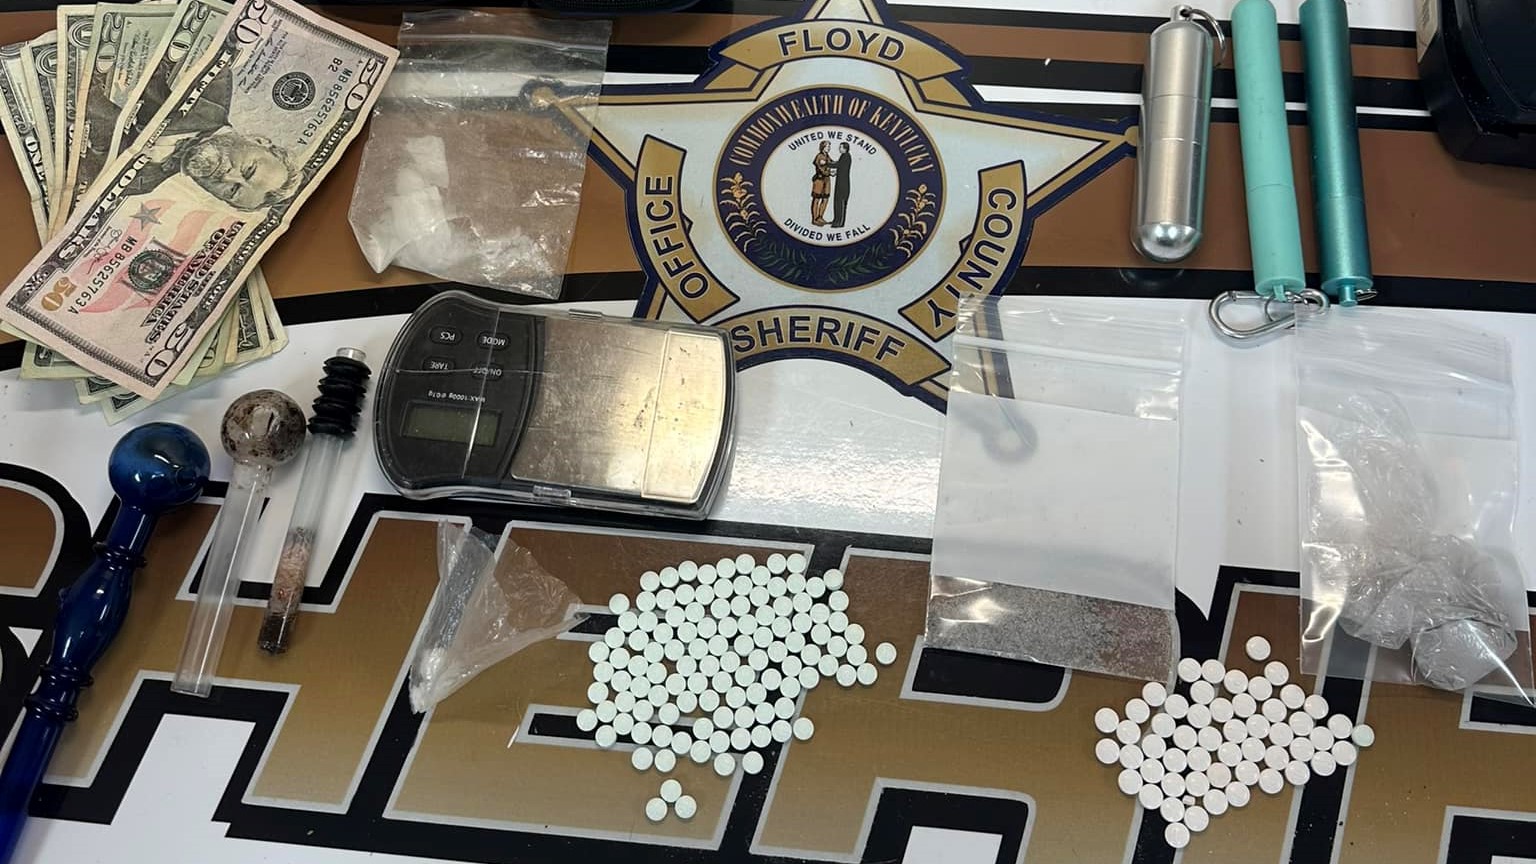 Chase results in trafficking arrest after deputy finds meth, heroin, fentanyl and pills